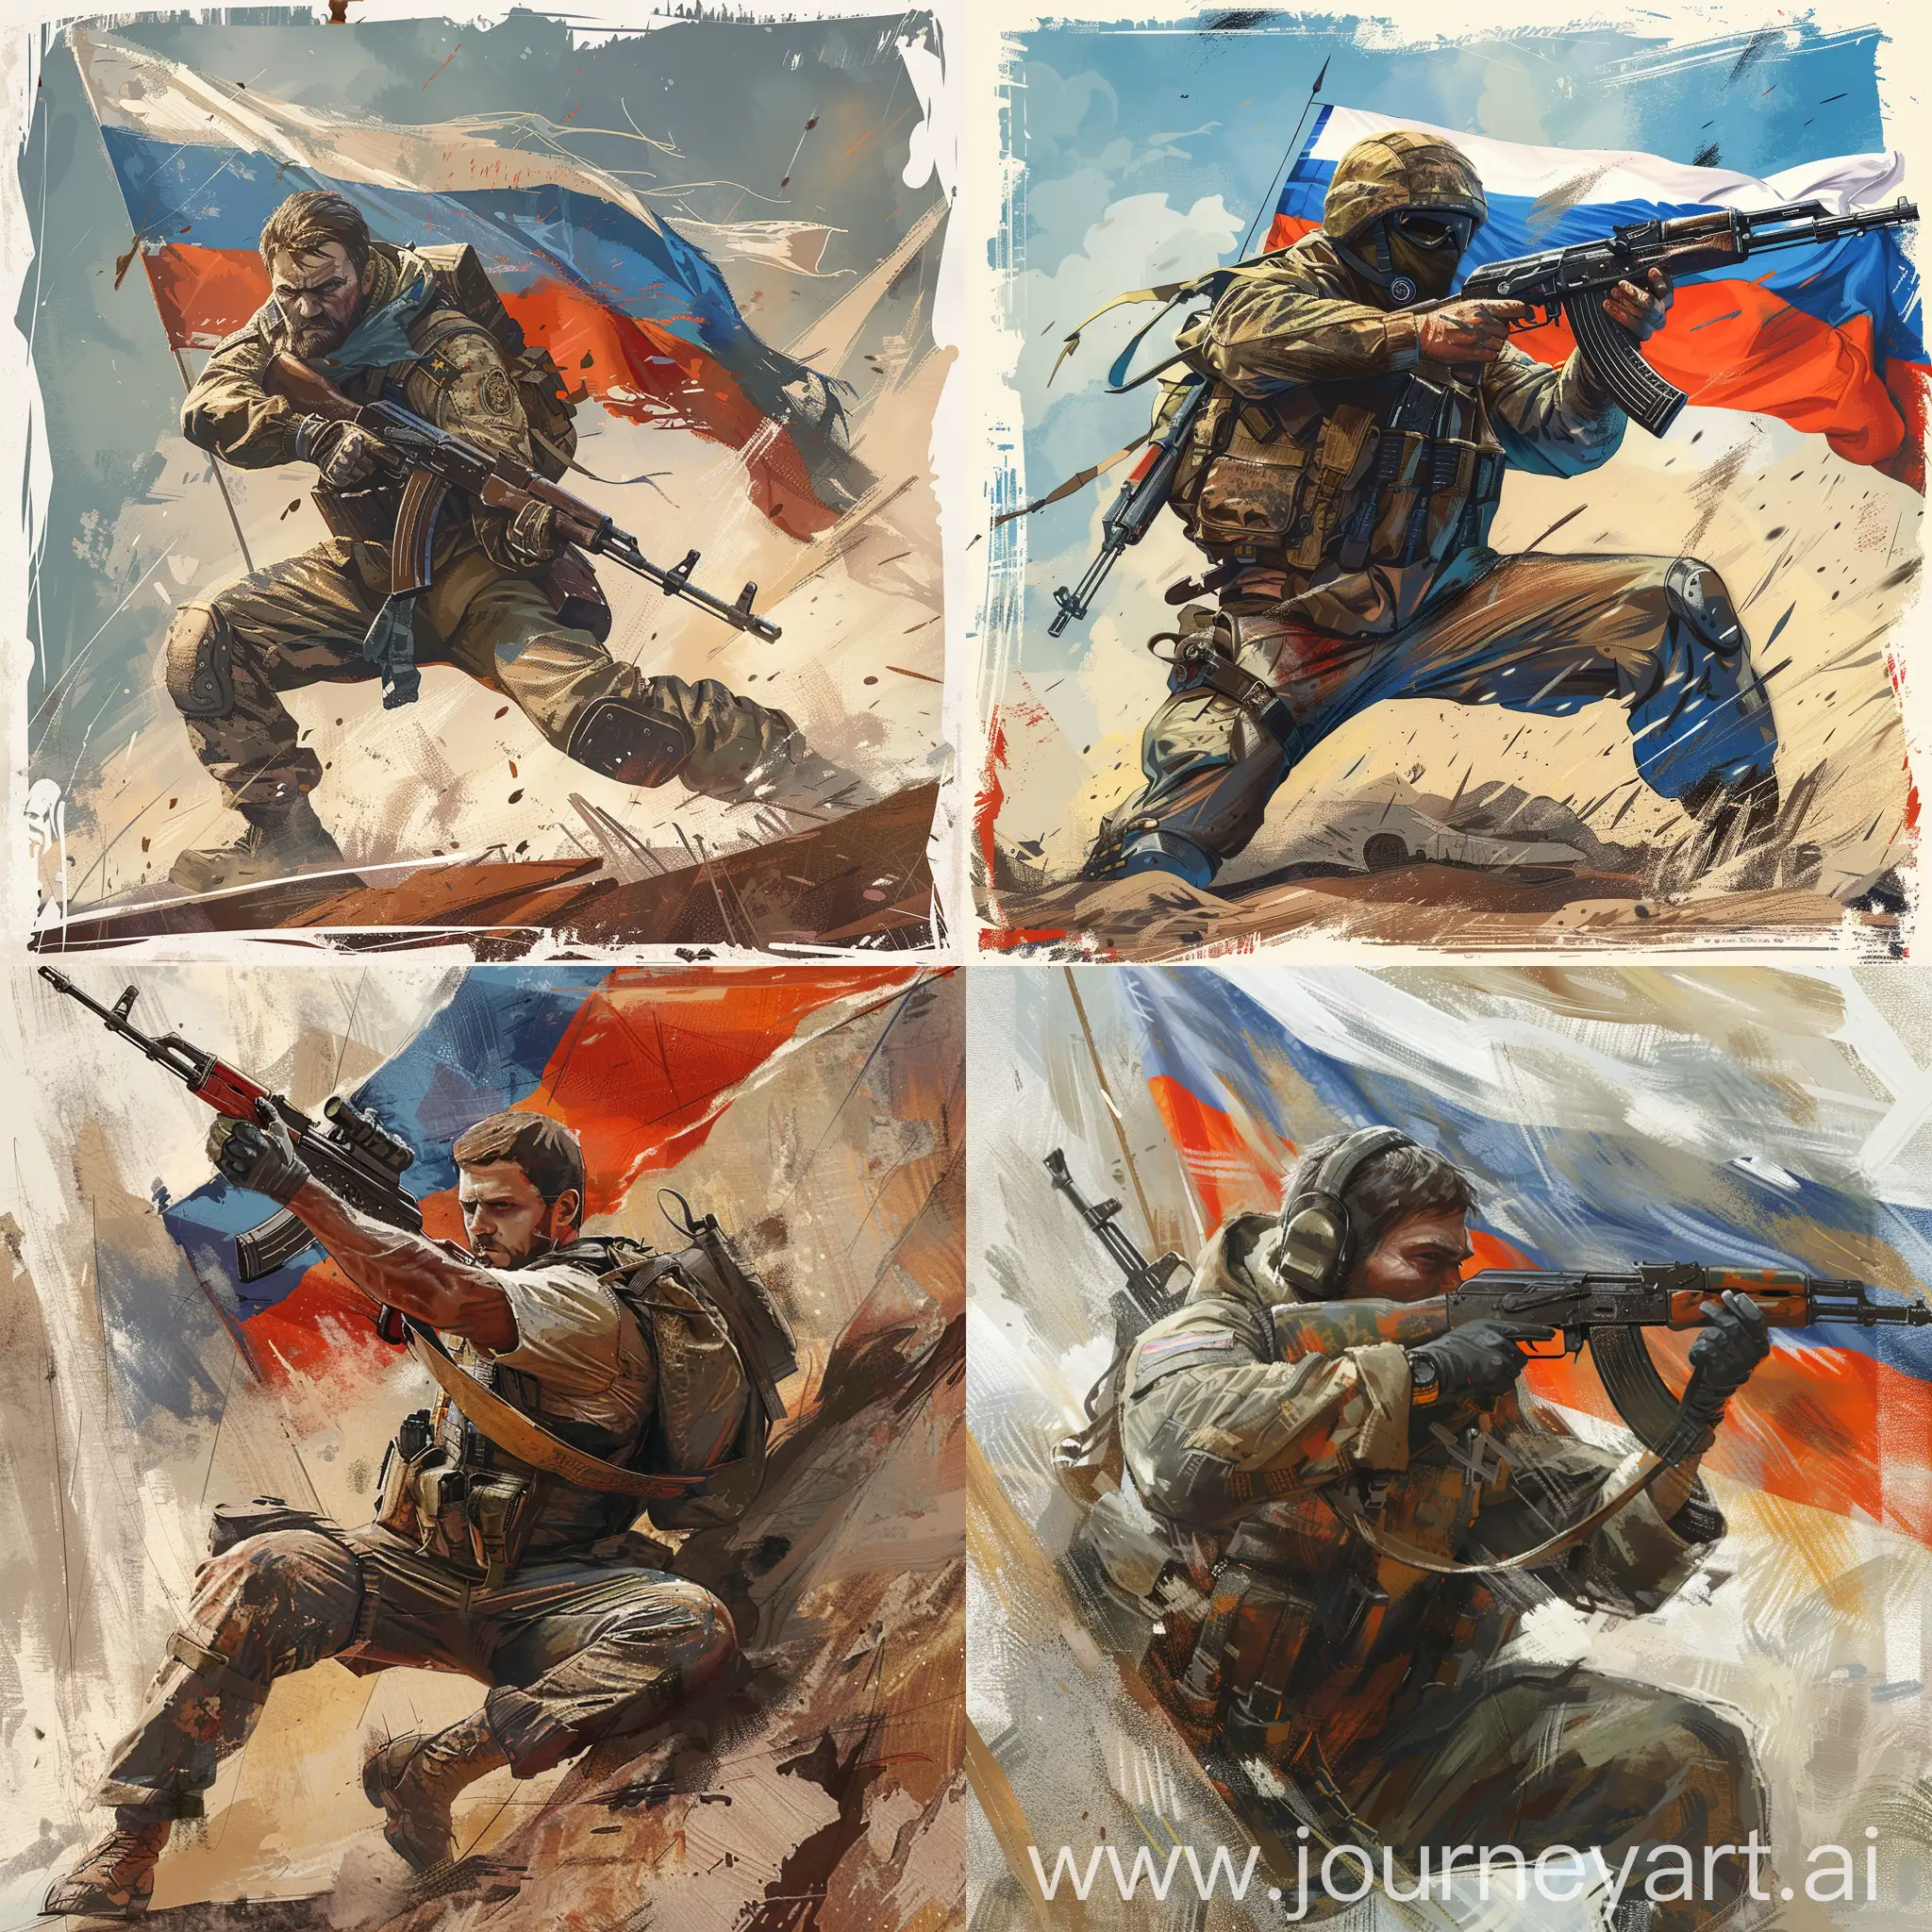 Russian modern soldier, AK-12, cool weapons, with the Russian flag, in the style of a Soviet postcard, epic, dynamic pose